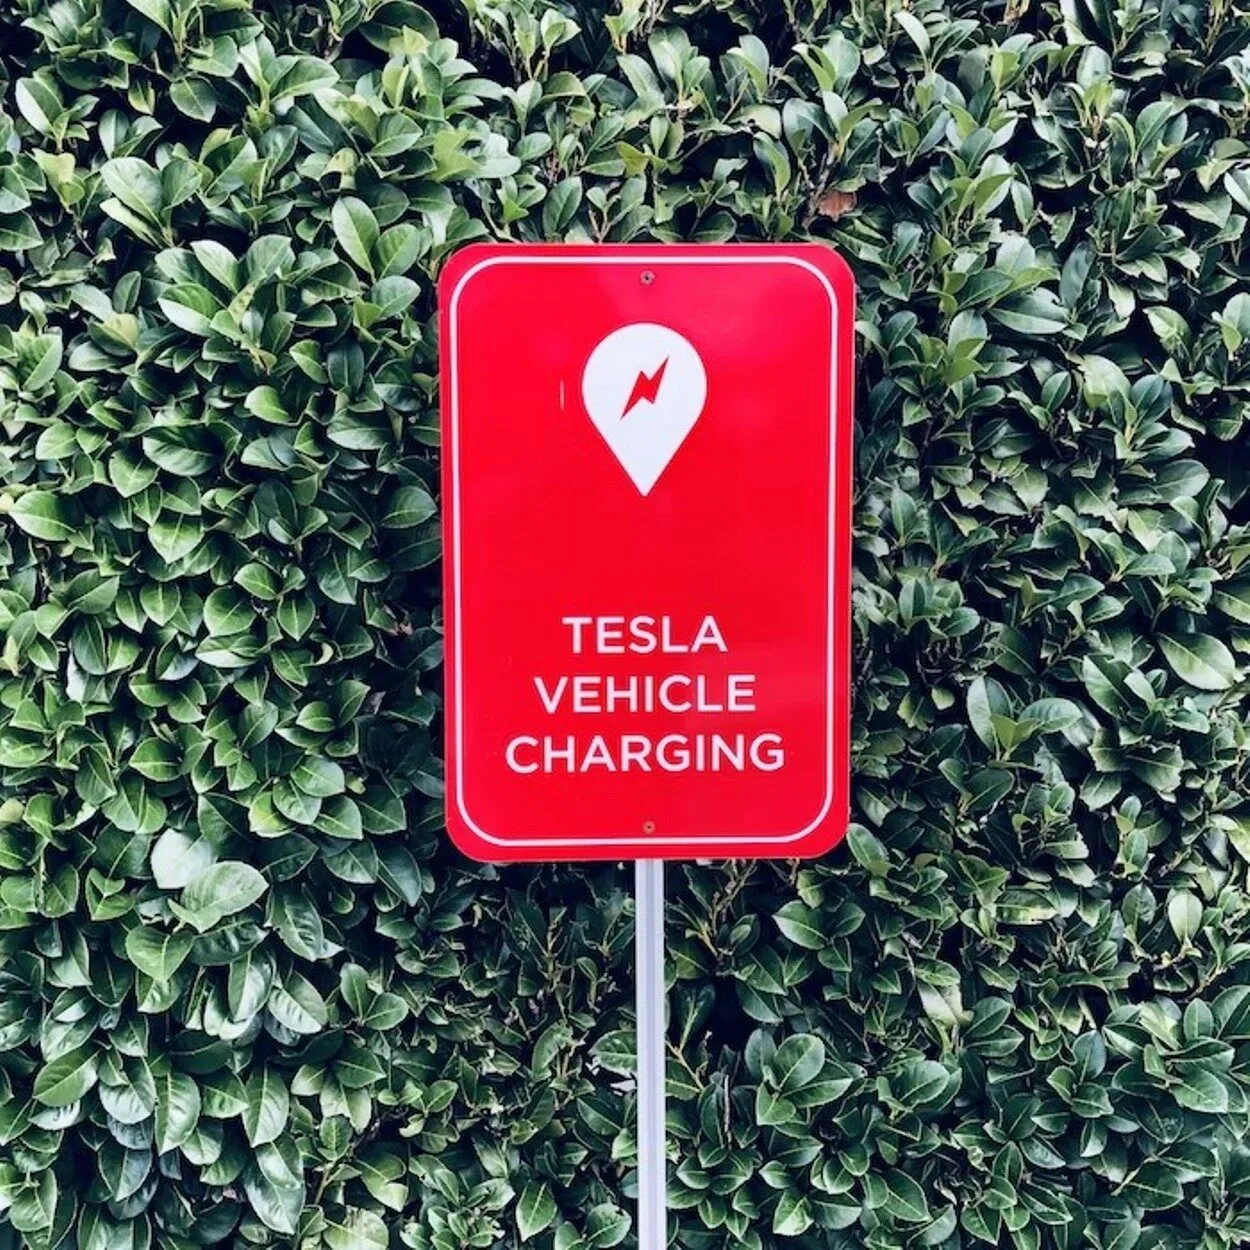 A sign board showing the tesla charging logo